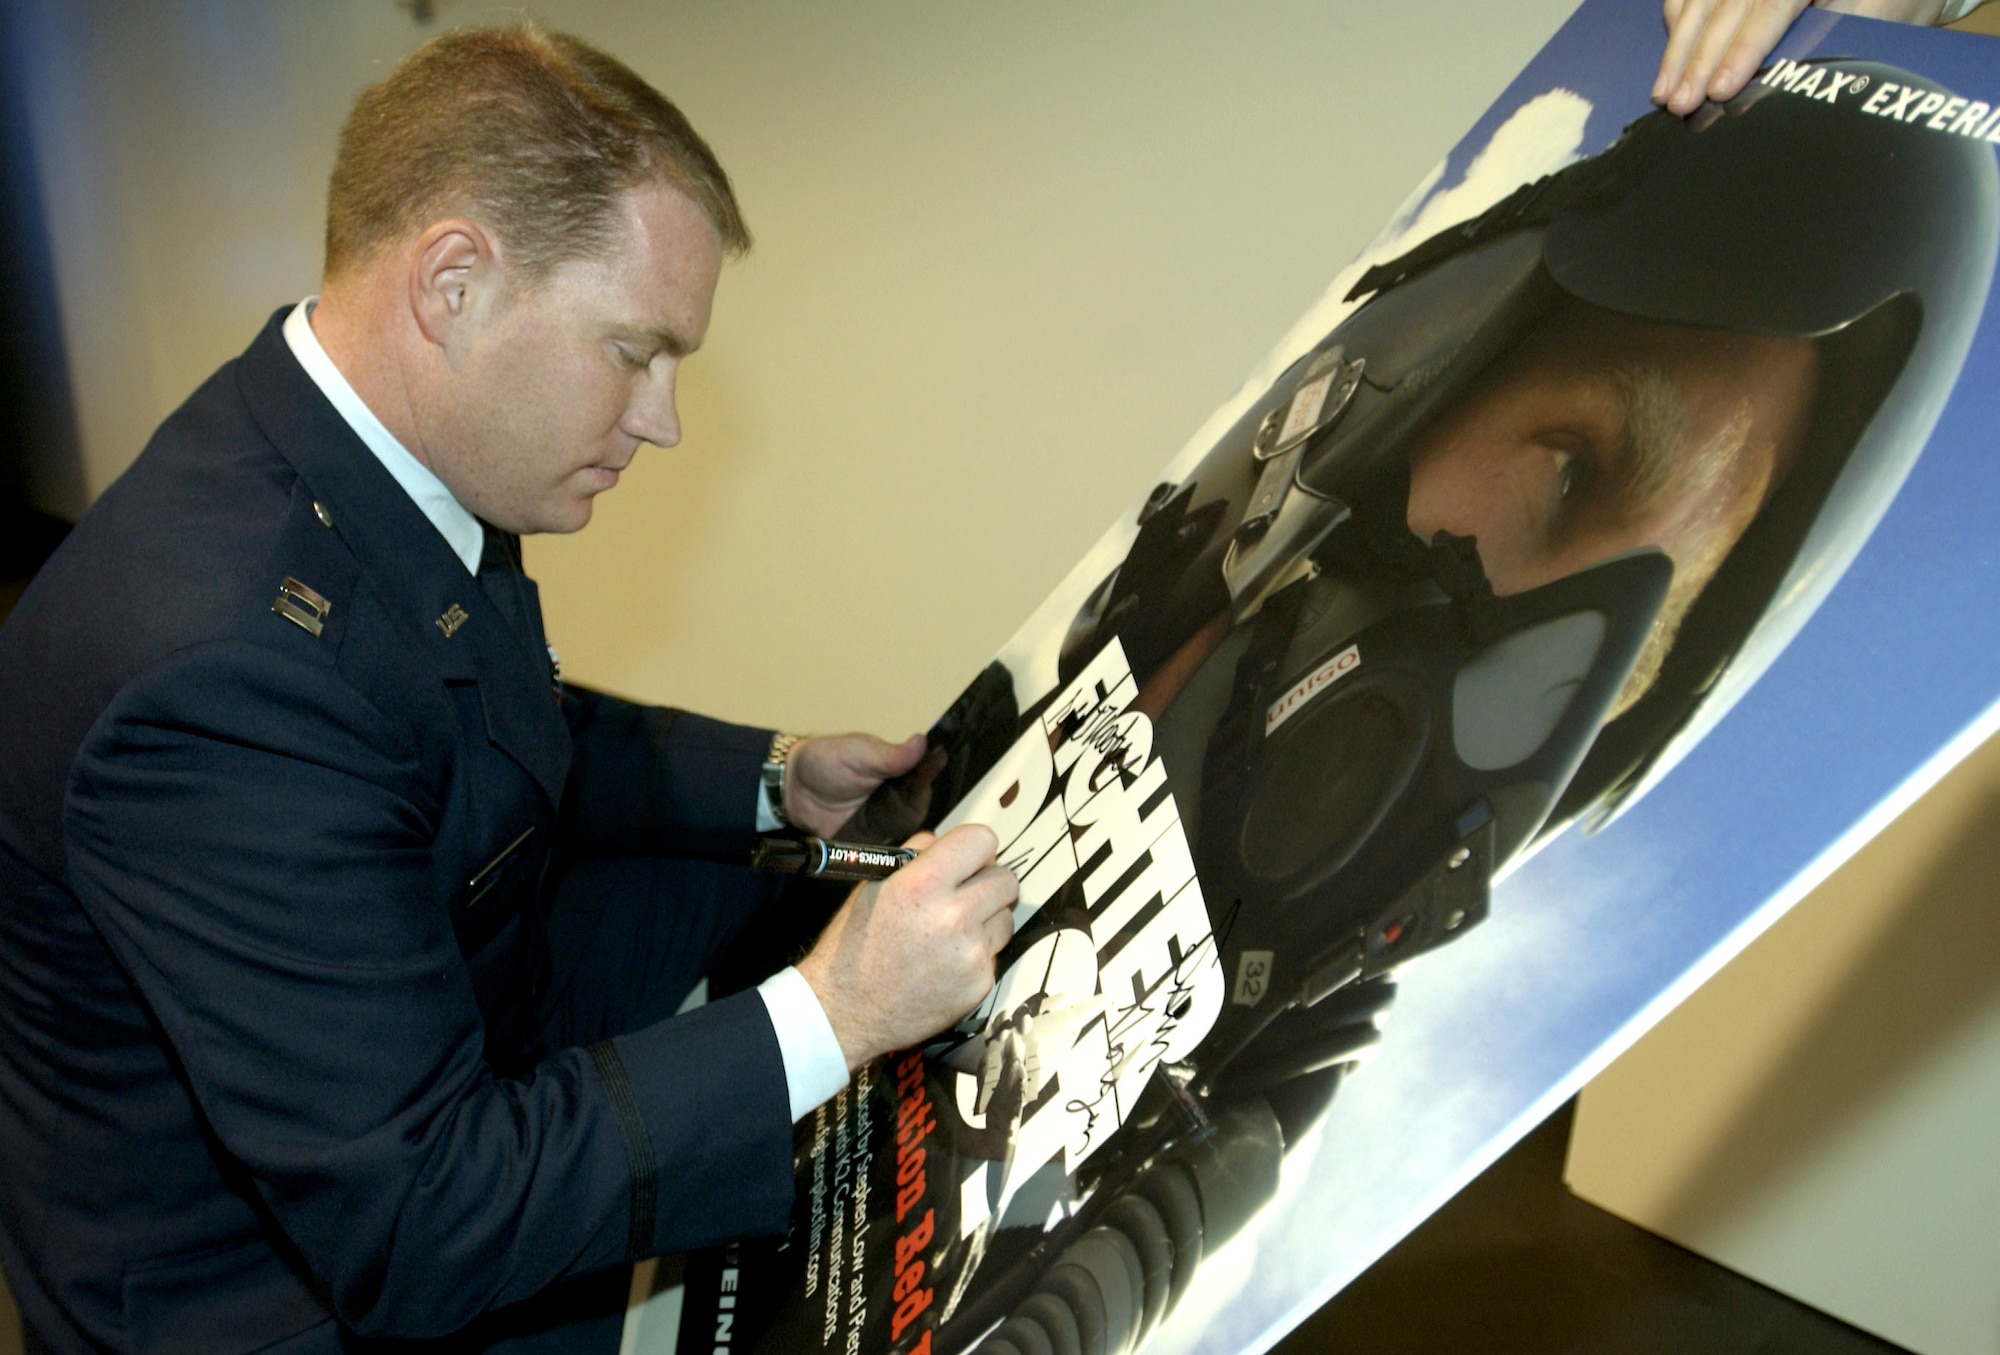 CHANTILLY, Va. -- Capt. John Stratton signs a movie poster at the premier of the new IMAX film "Fighter Pilot: Operation Red Flag."  He served as the star of the film.  The movie chronicles his experience as he participates in his first Red Flag exercise.  The film made its premier Dec. 2 at the National Air and Space Museum here.  (U.S. Air Force photo by Master Sgt. James Varhegyi) 